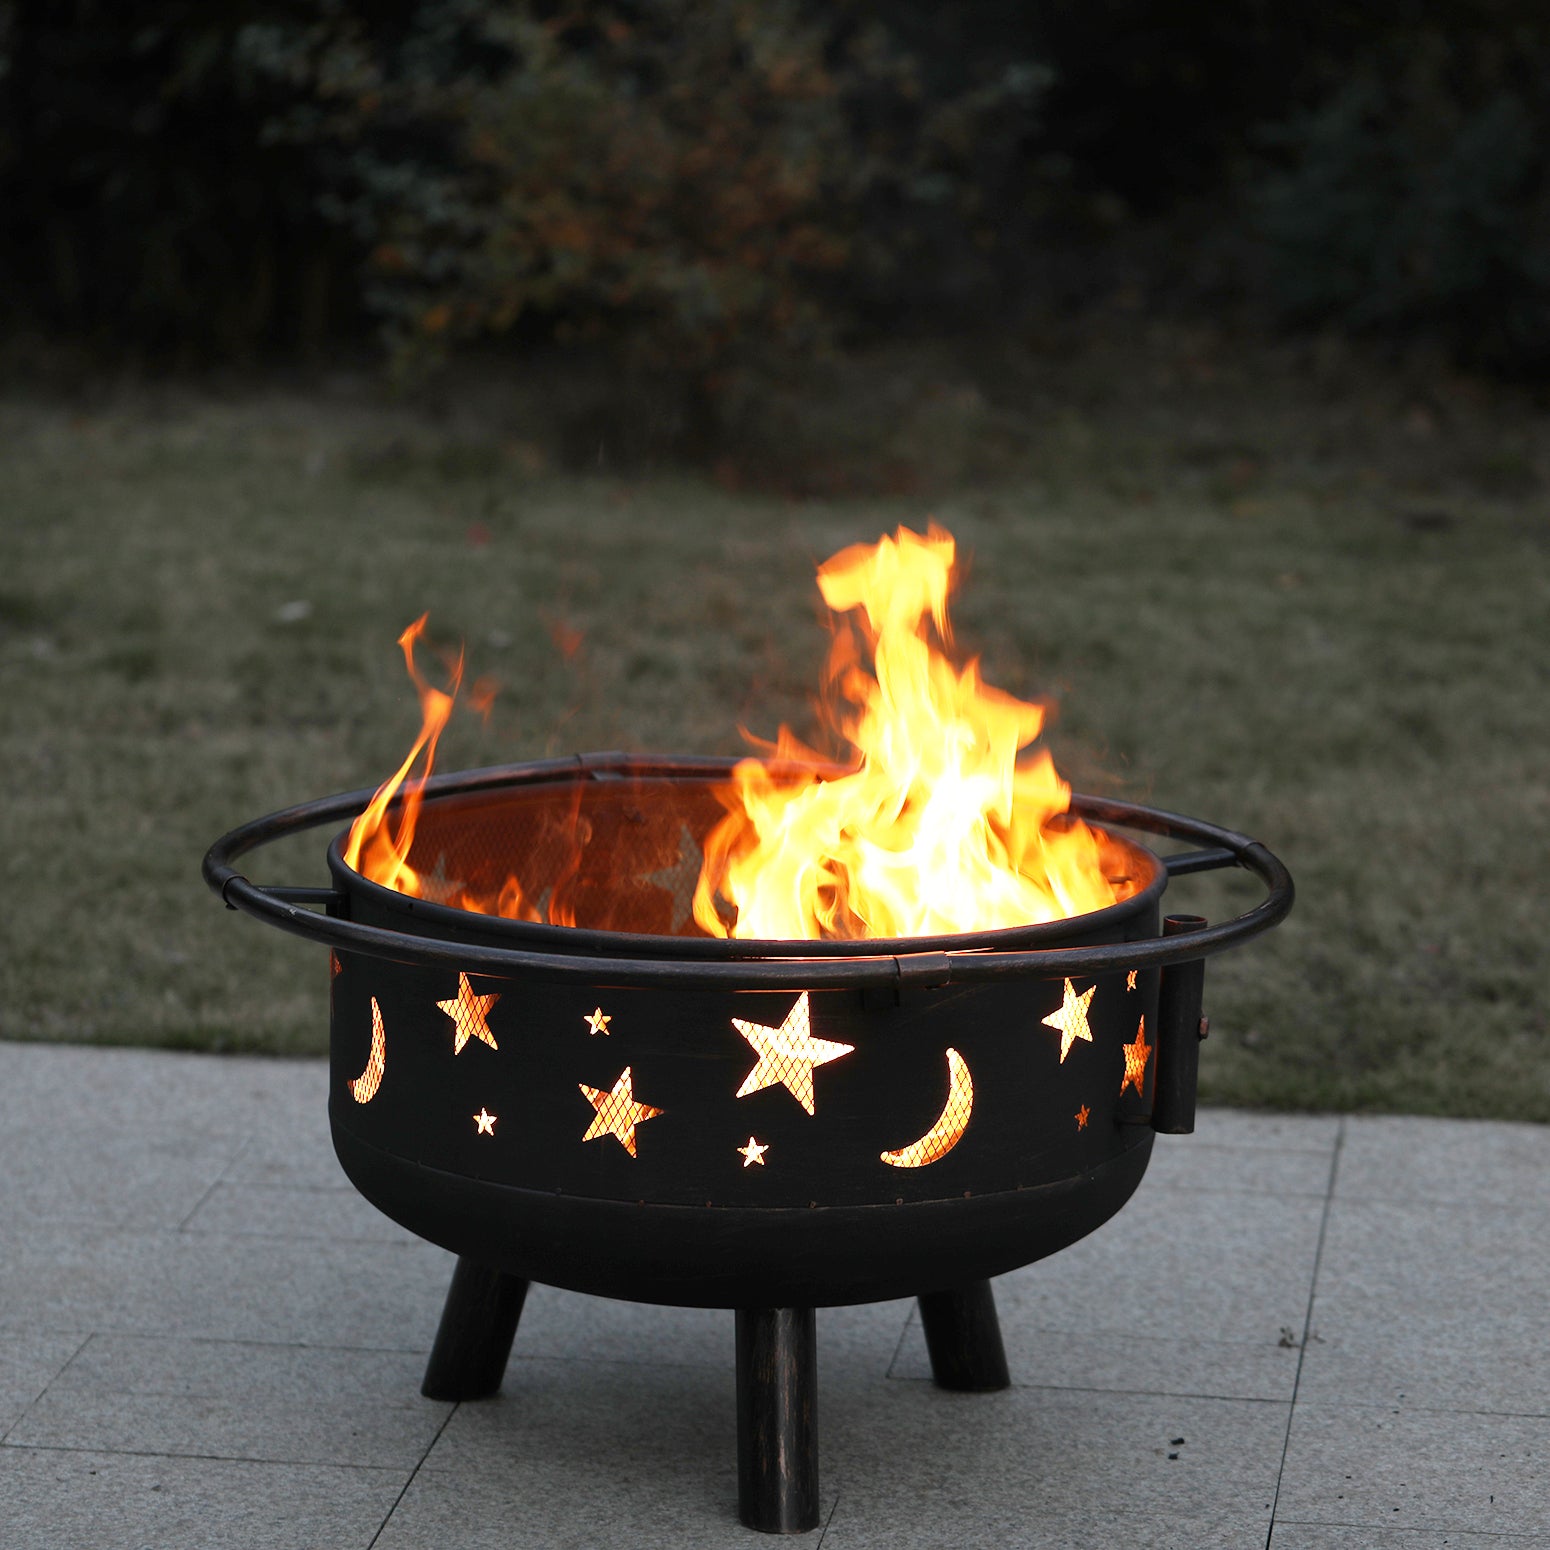 PHI VILLA 30" 2-In-1 Moon & Star Pattern Patio Fire Pit with Grilling Grid